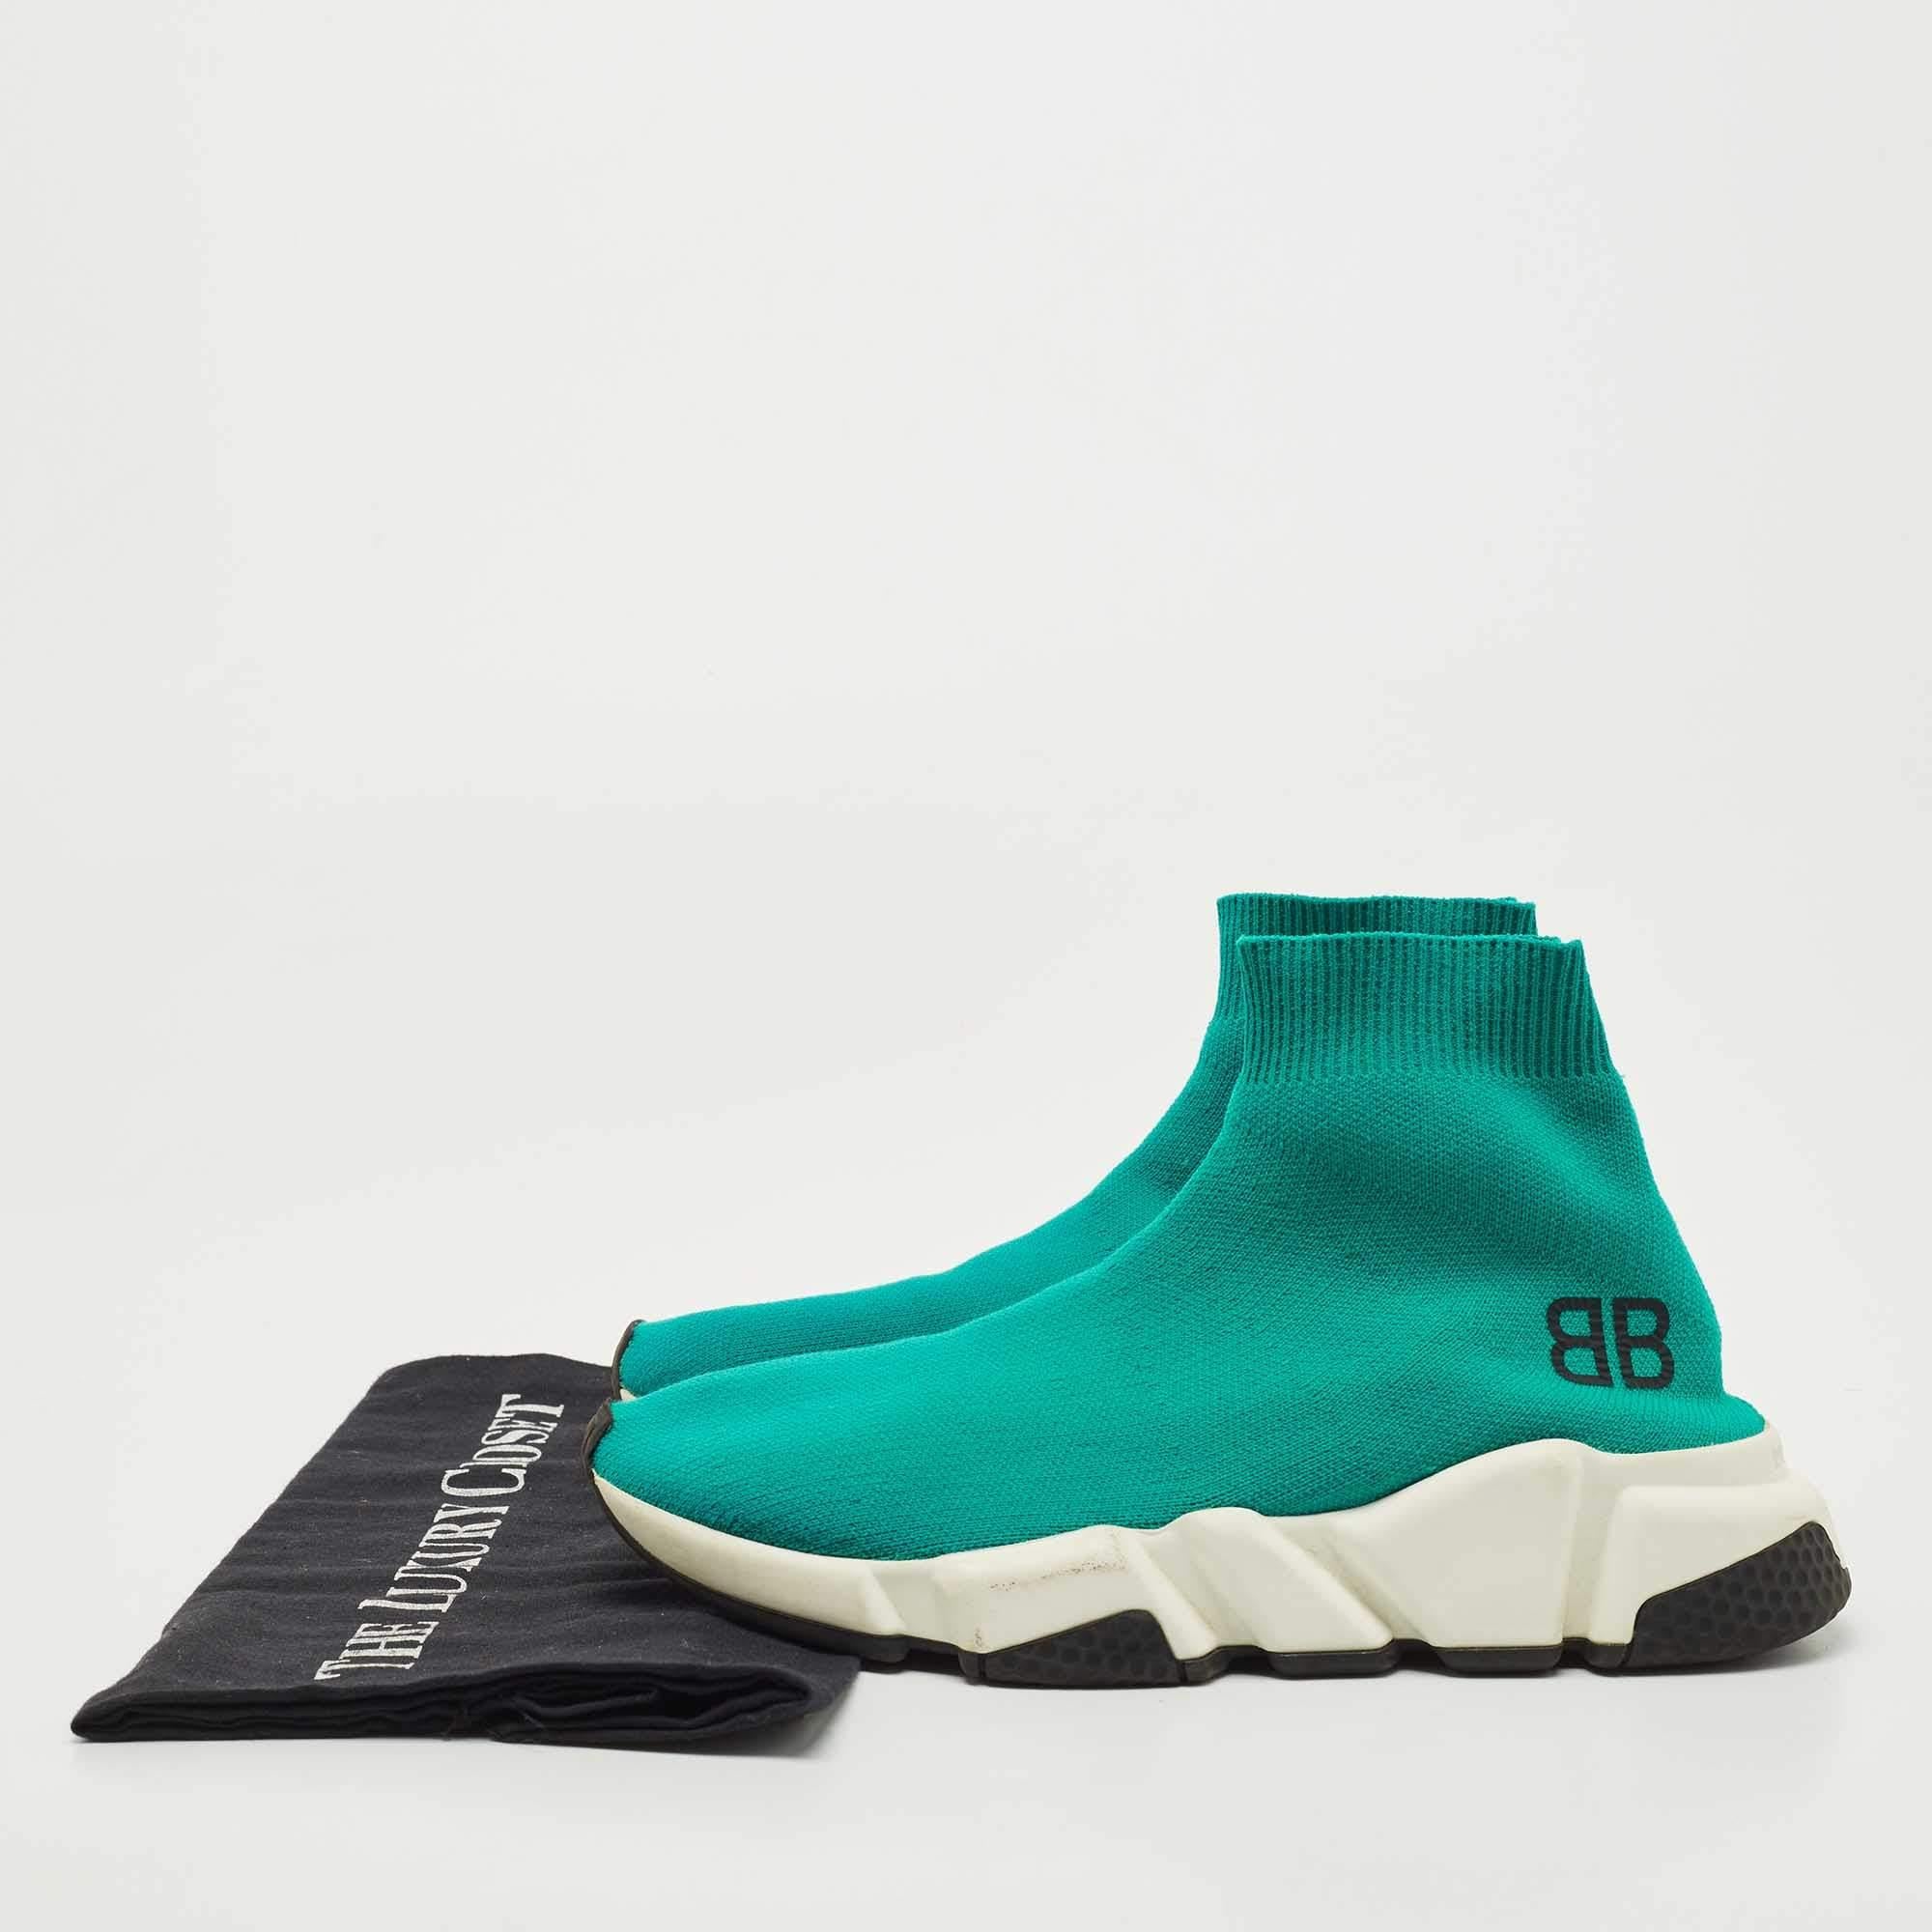 Balenciaga Turquoise Knit Fabric Speed Trainer Sneakers Size 35 For Sale 4